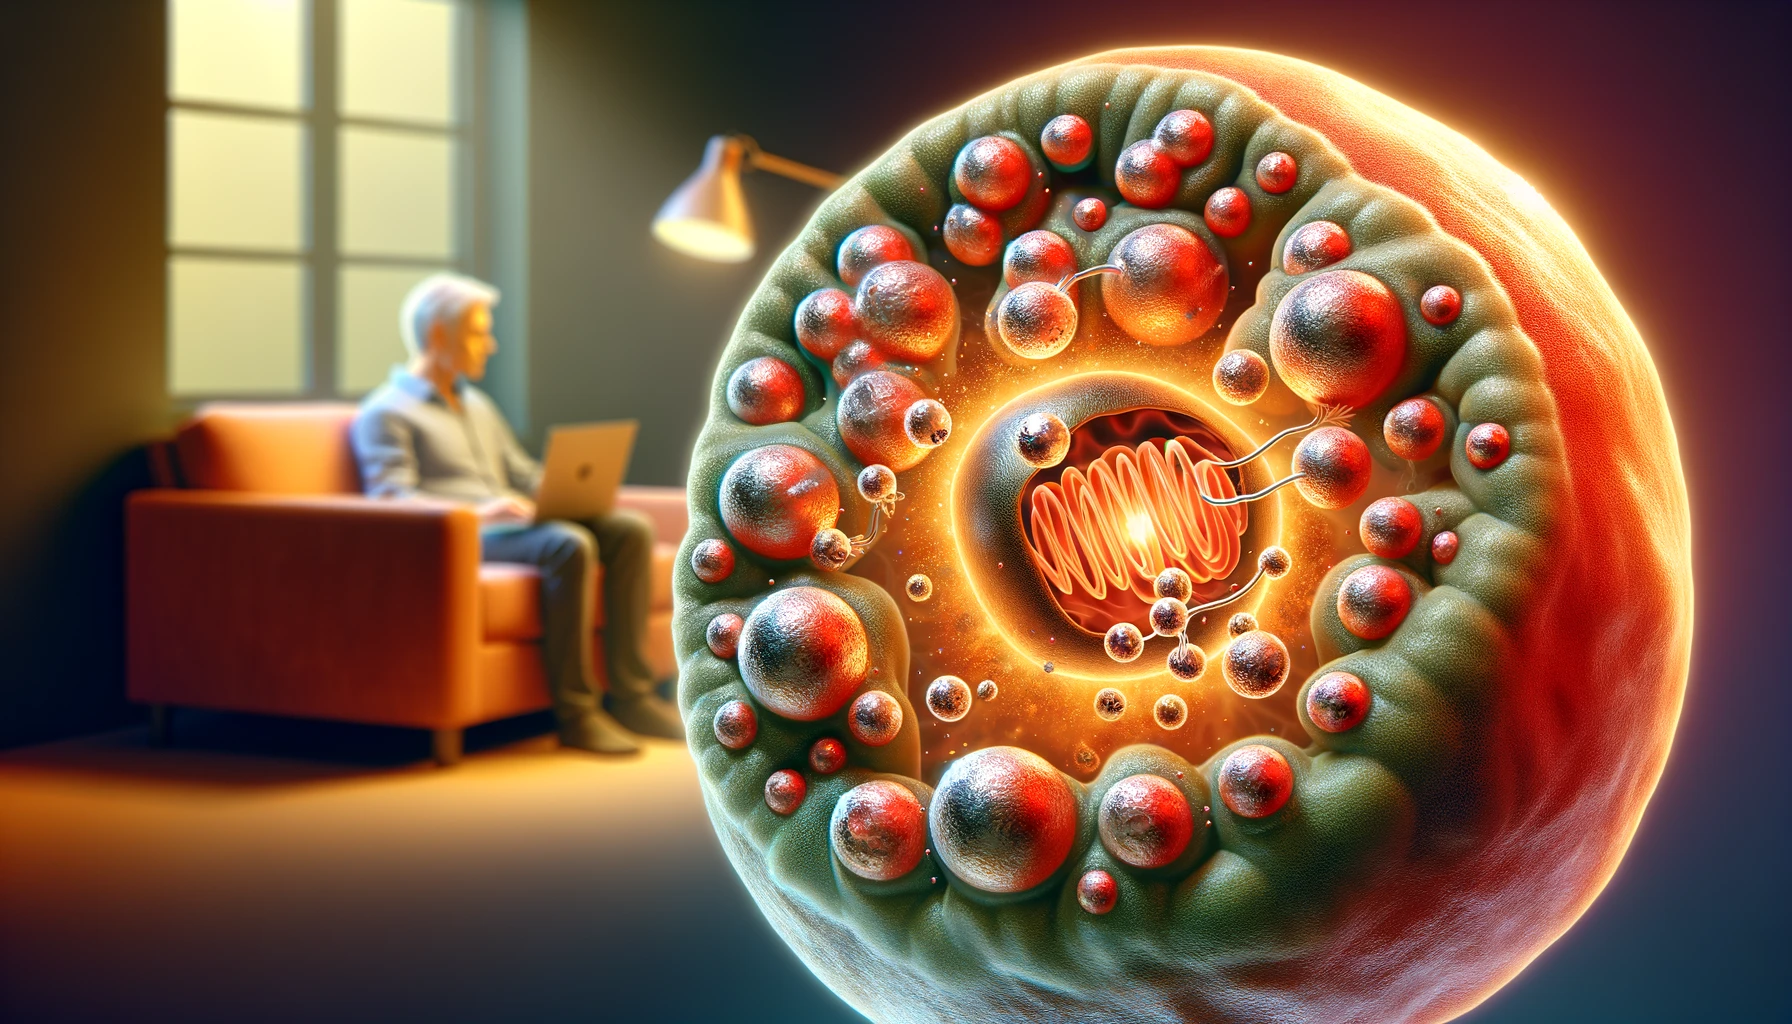 Illustrative depiction of a human cell with mitochondria and ATP molecules, magnesium atoms highlighted, against the backdrop of a sedentary lifestyle with a person on a couch.